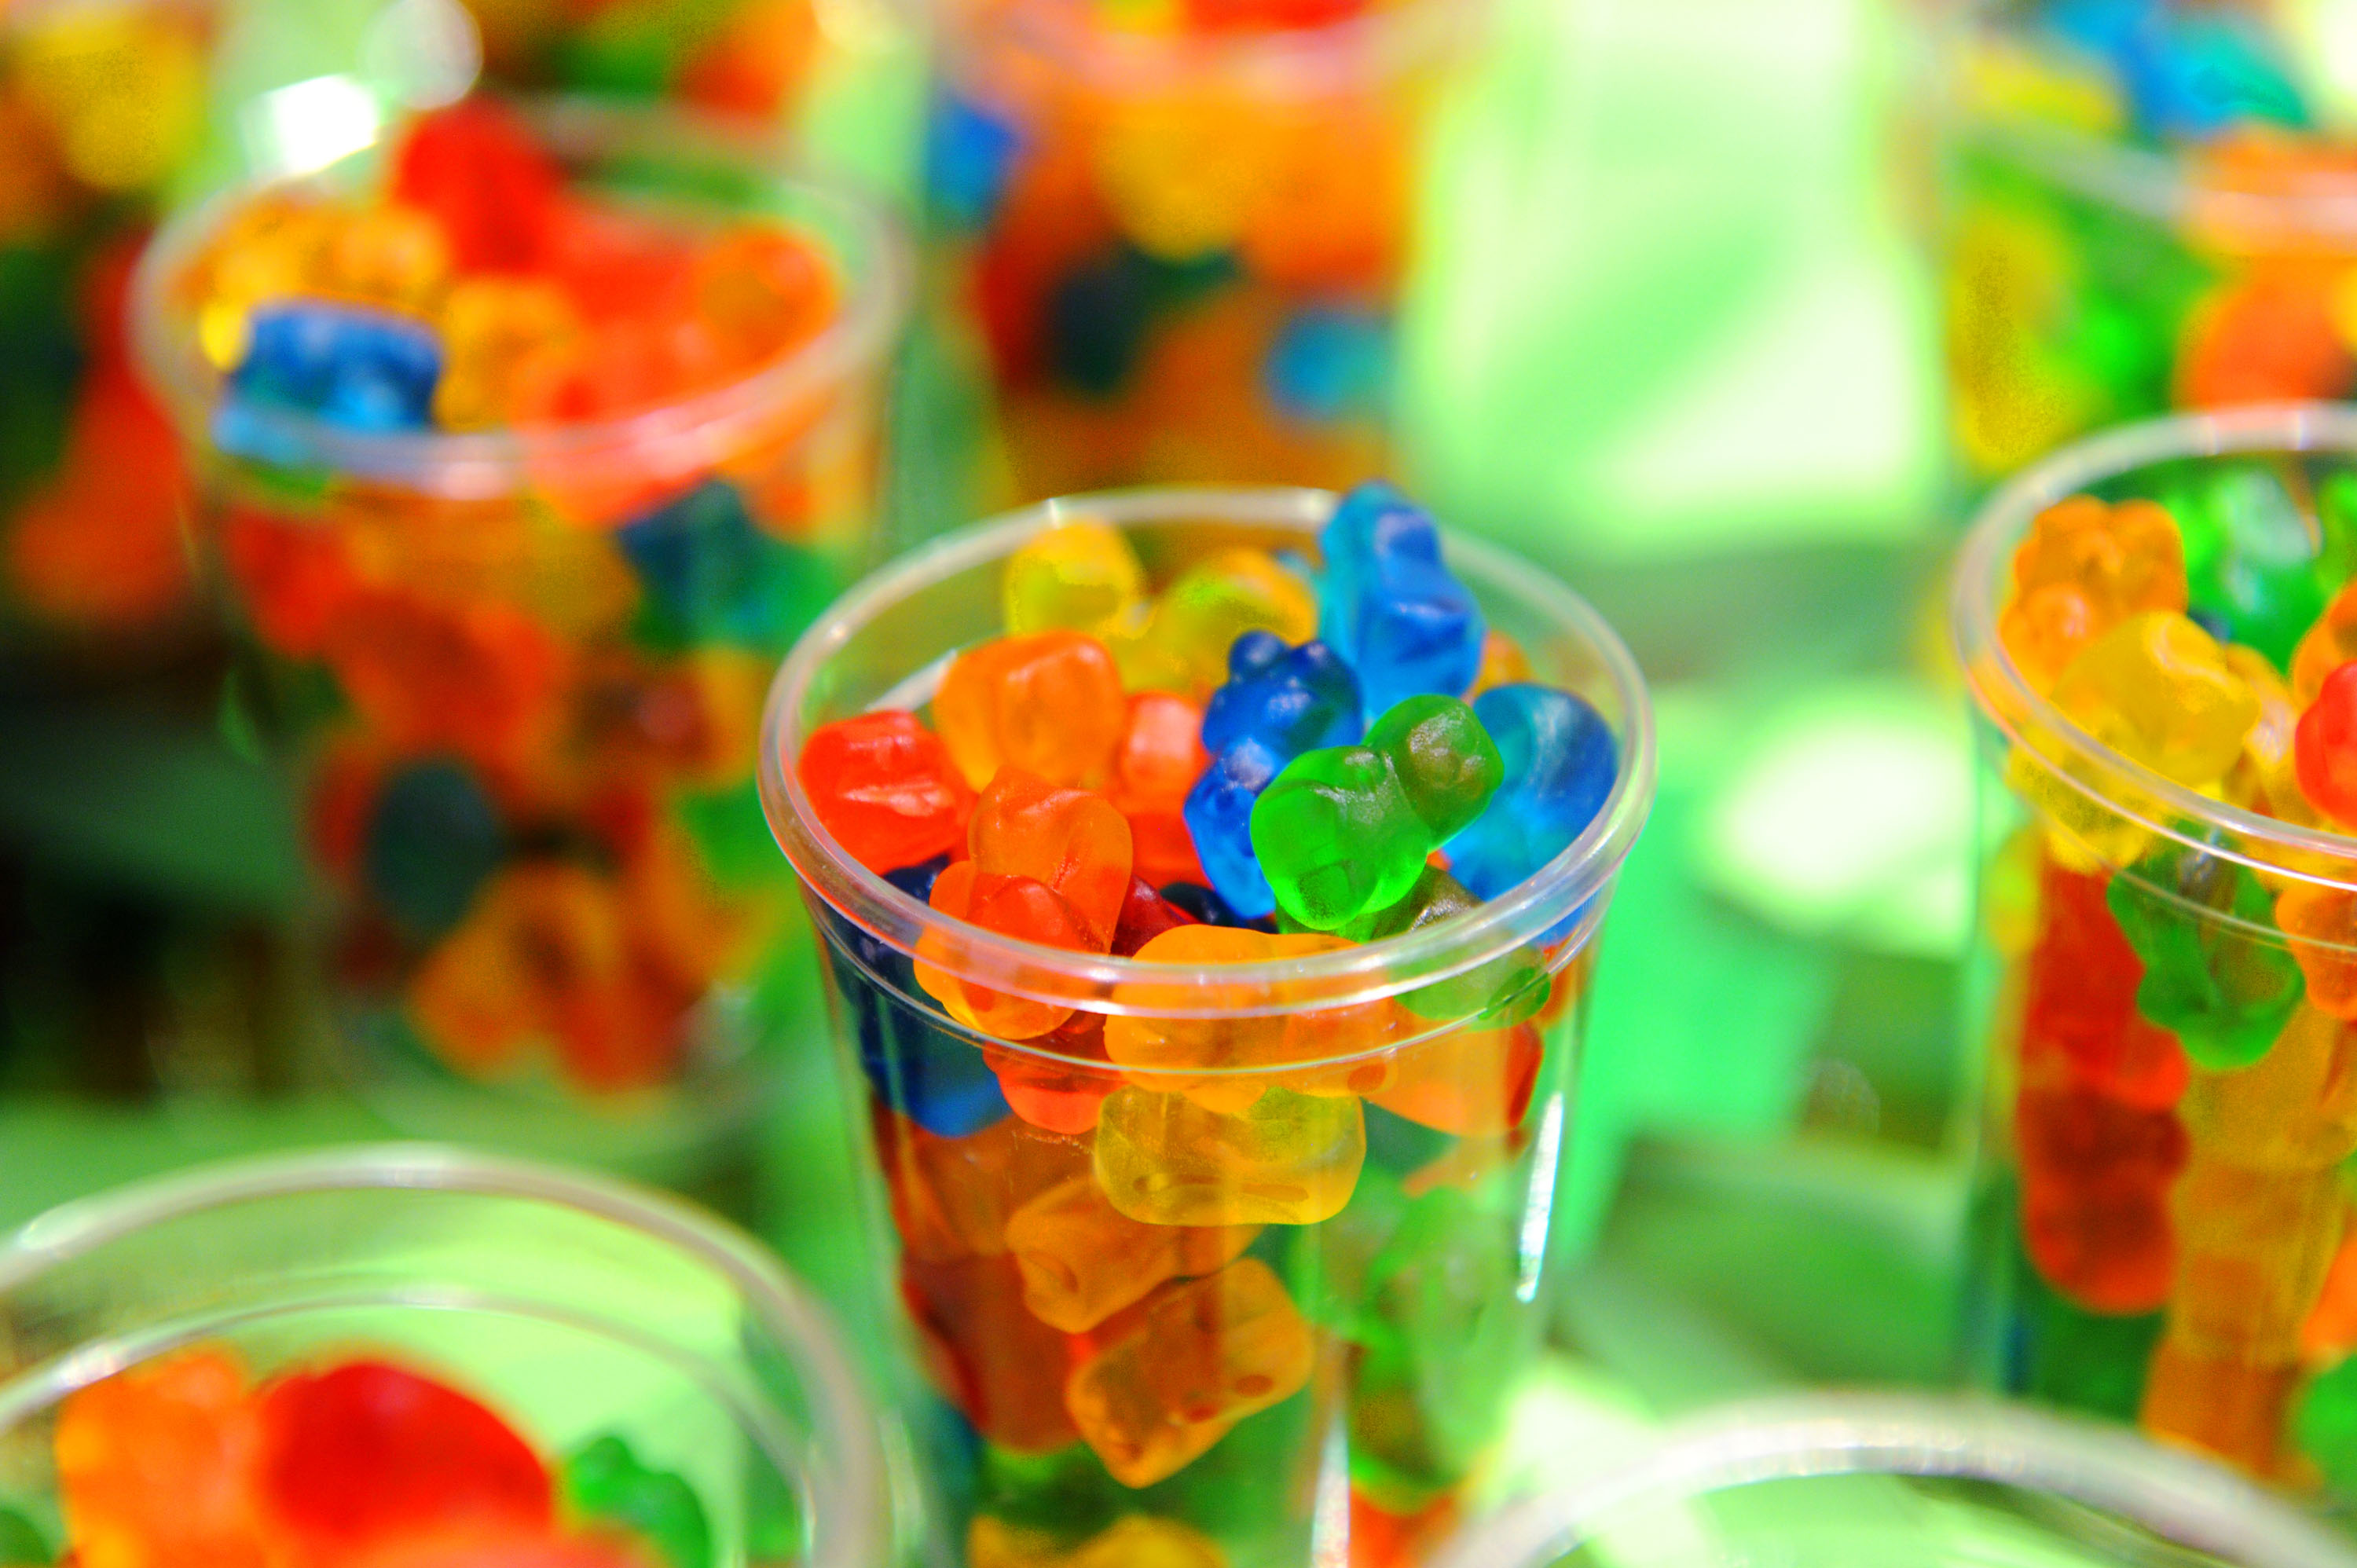 Gummy Bear Food And Drink Image Galleries